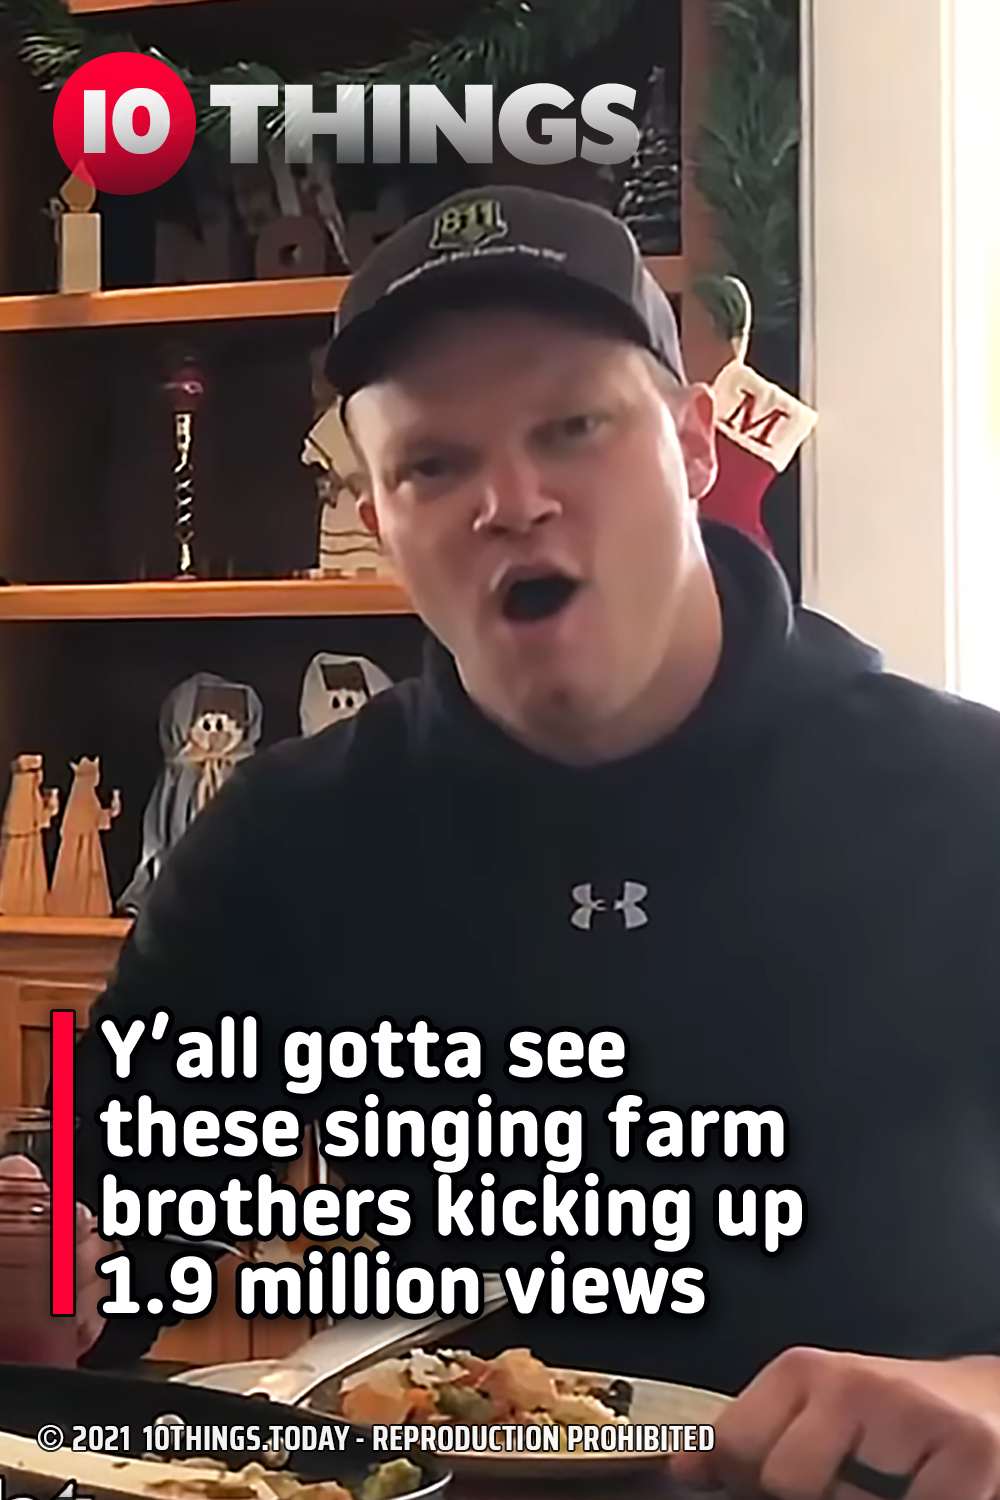 Y’all gotta see these singing farm brothers kicking up 1.9 million views